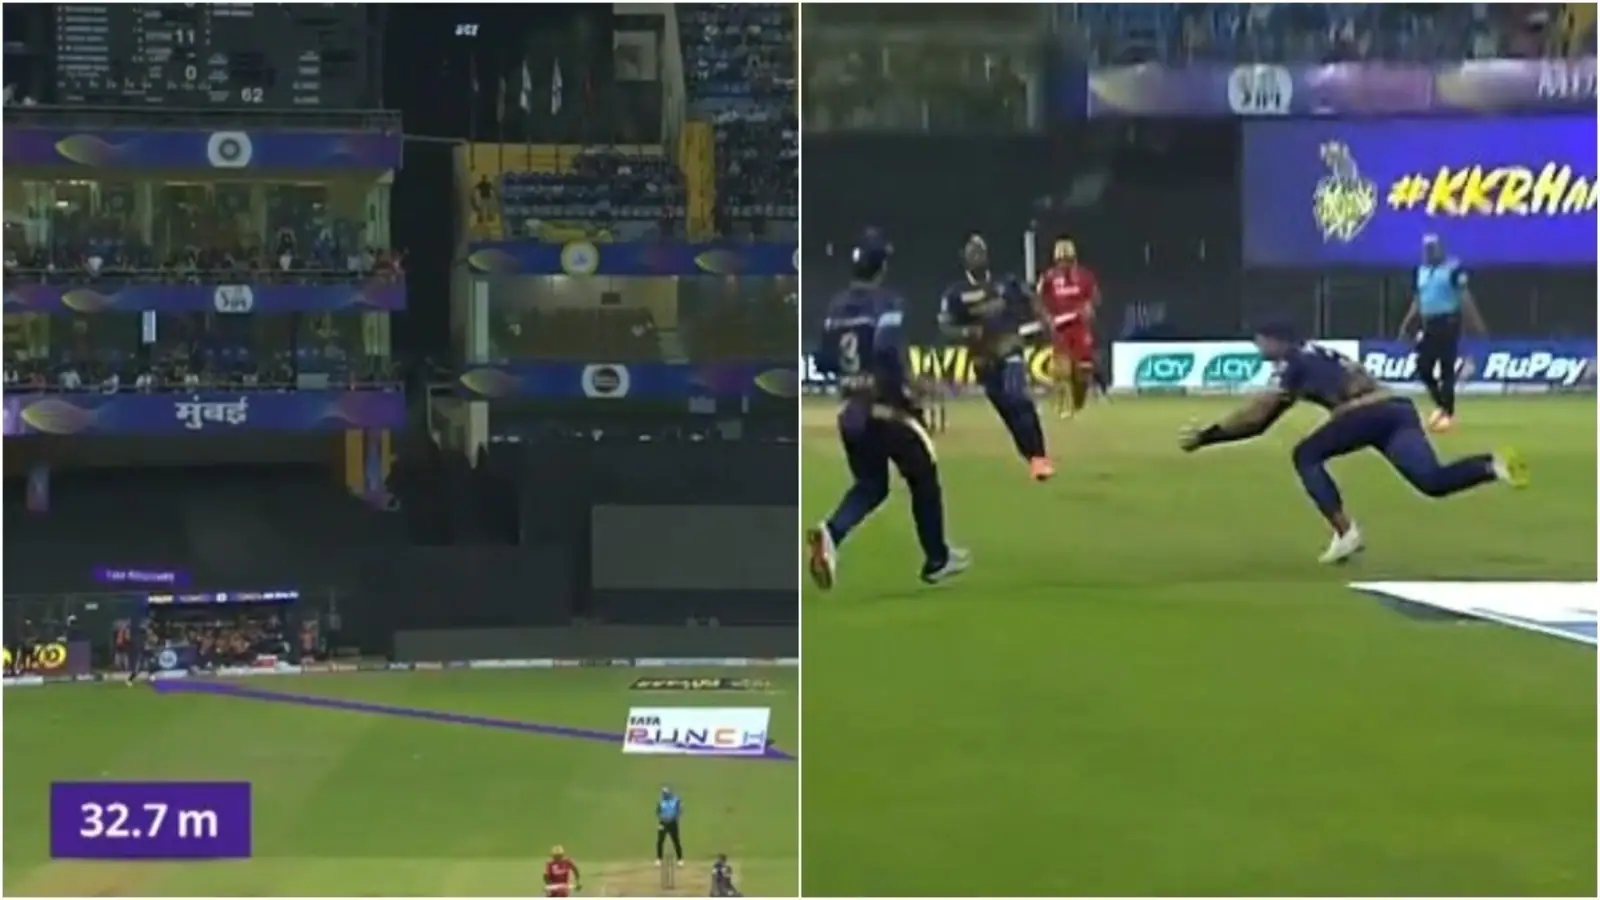 Watch: KKR’s Tim Southee covers 32m distance from long-off in incredible sprint to take stunning catch against PBKS